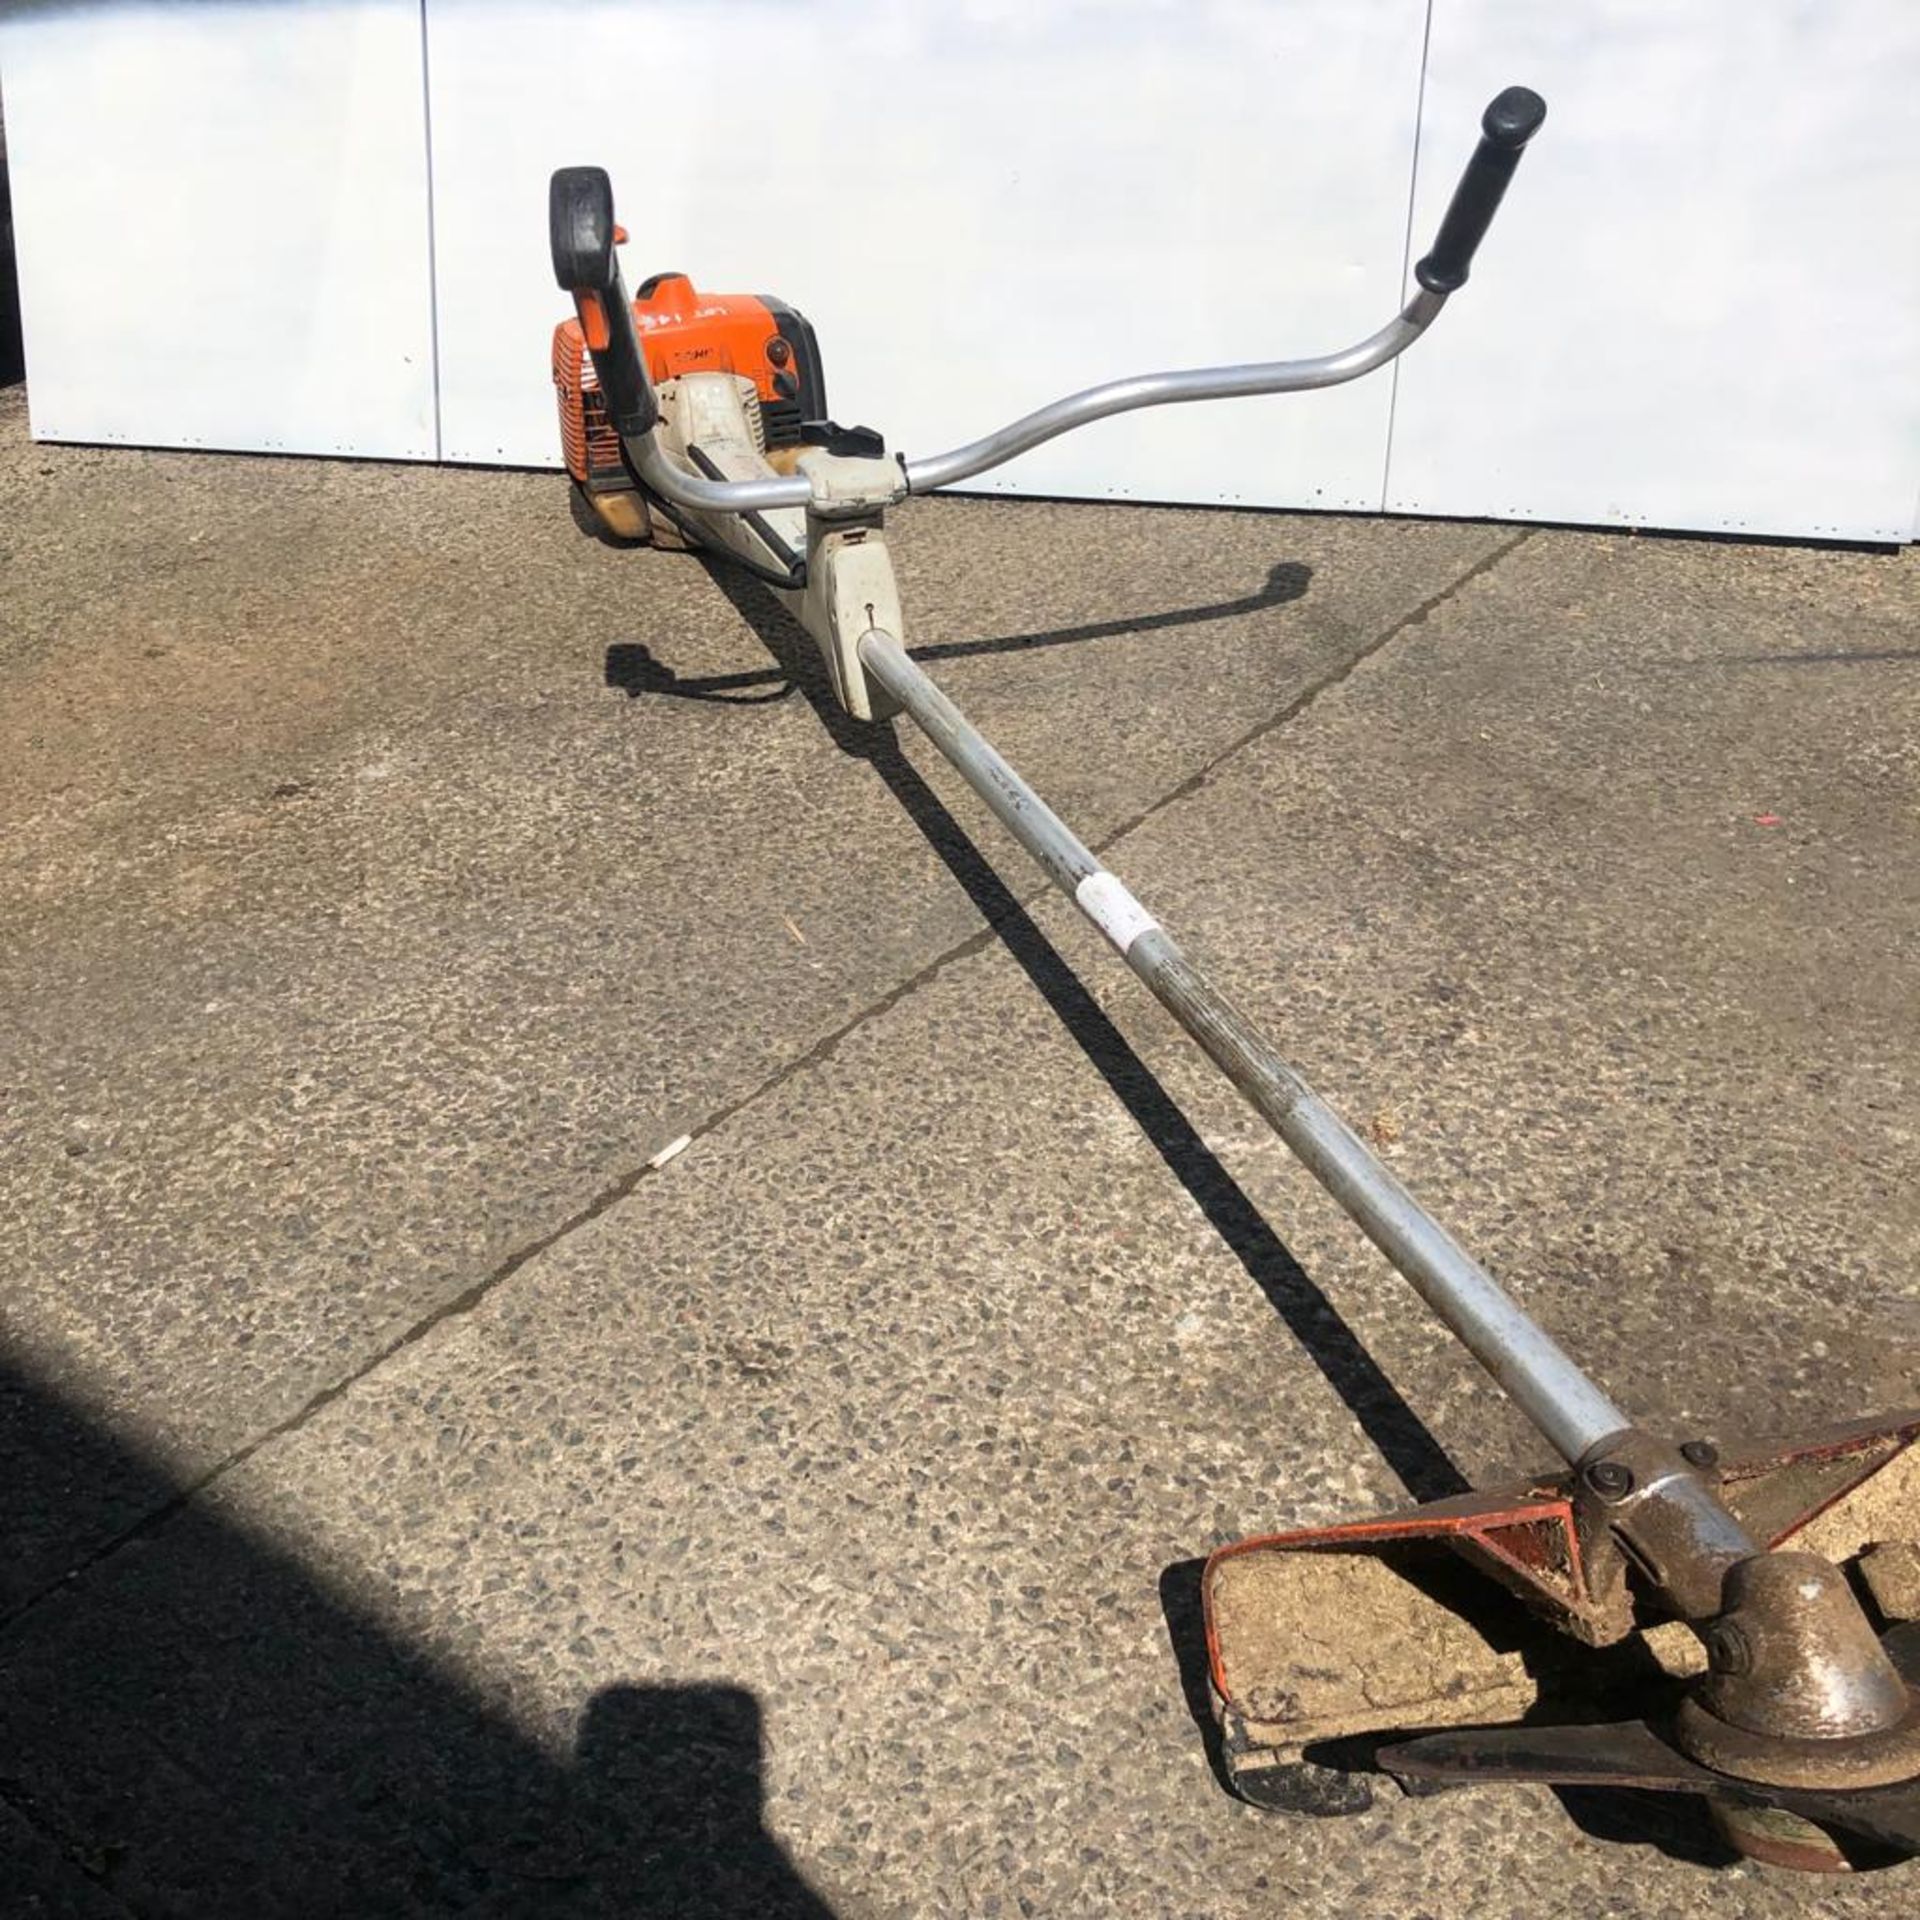 Stihl FS 450 Strimmer /Clearing Saw